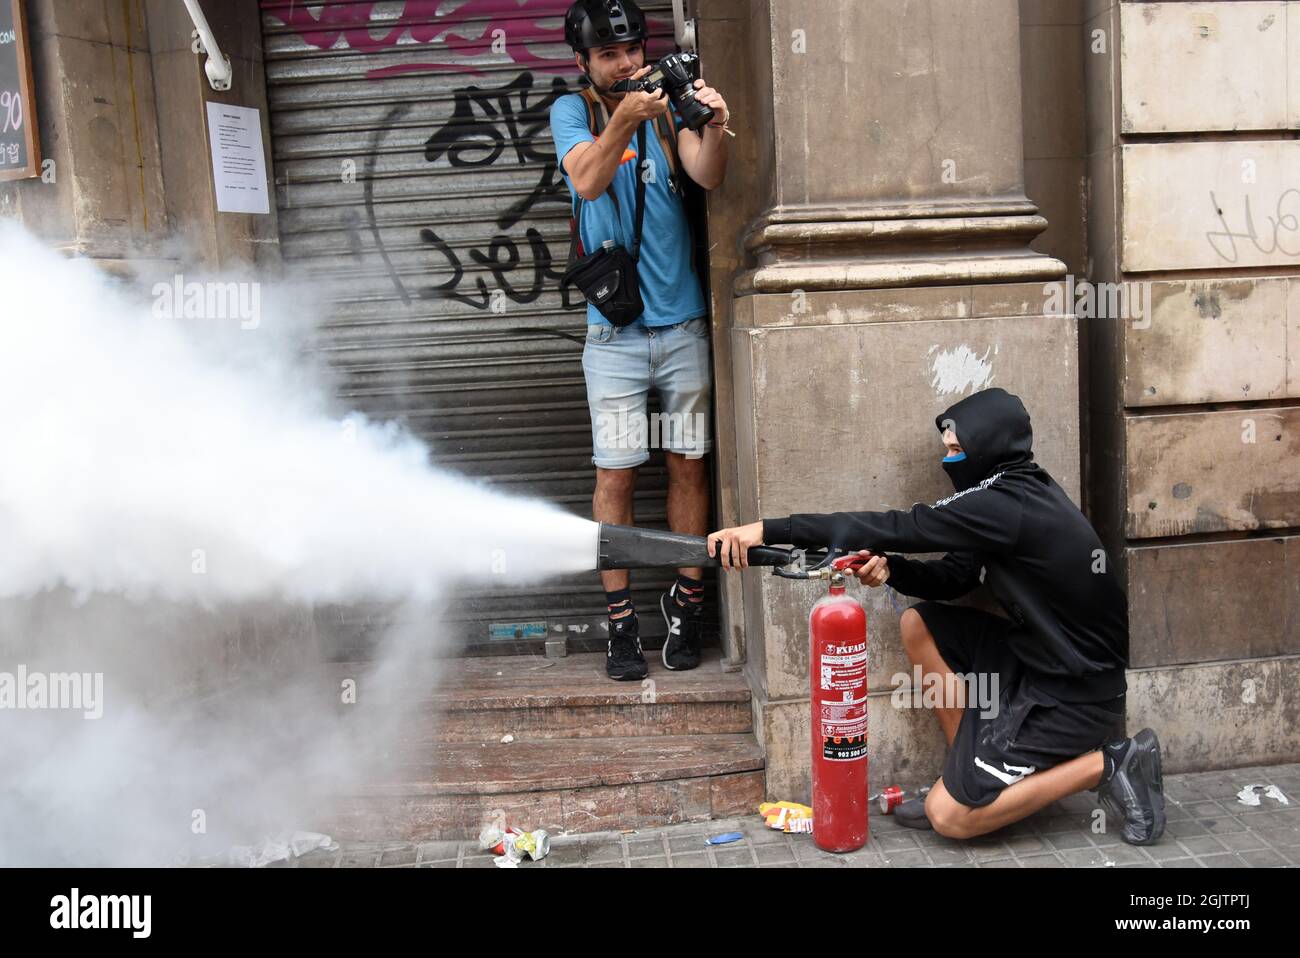 Barcelona, Spain. 11th Sep, 2021. A protester throws the powder from a fire extinguisher at the Catalan Police during the demonstration of the National Day of Catalonia.Pro-independence protesters during the National Day of Catalonia confront the Catalan Police (Mossos d'Escuadra) for throwing cans of paint, smoke, some cans, fire extinguishers, bottles and iron bars at the Spanish Police at their headquarters in Barcelona in protest for the police charges carried out in the illegal referendum of 2017. Credit: SOPA Images Limited/Alamy Live News Stock Photo